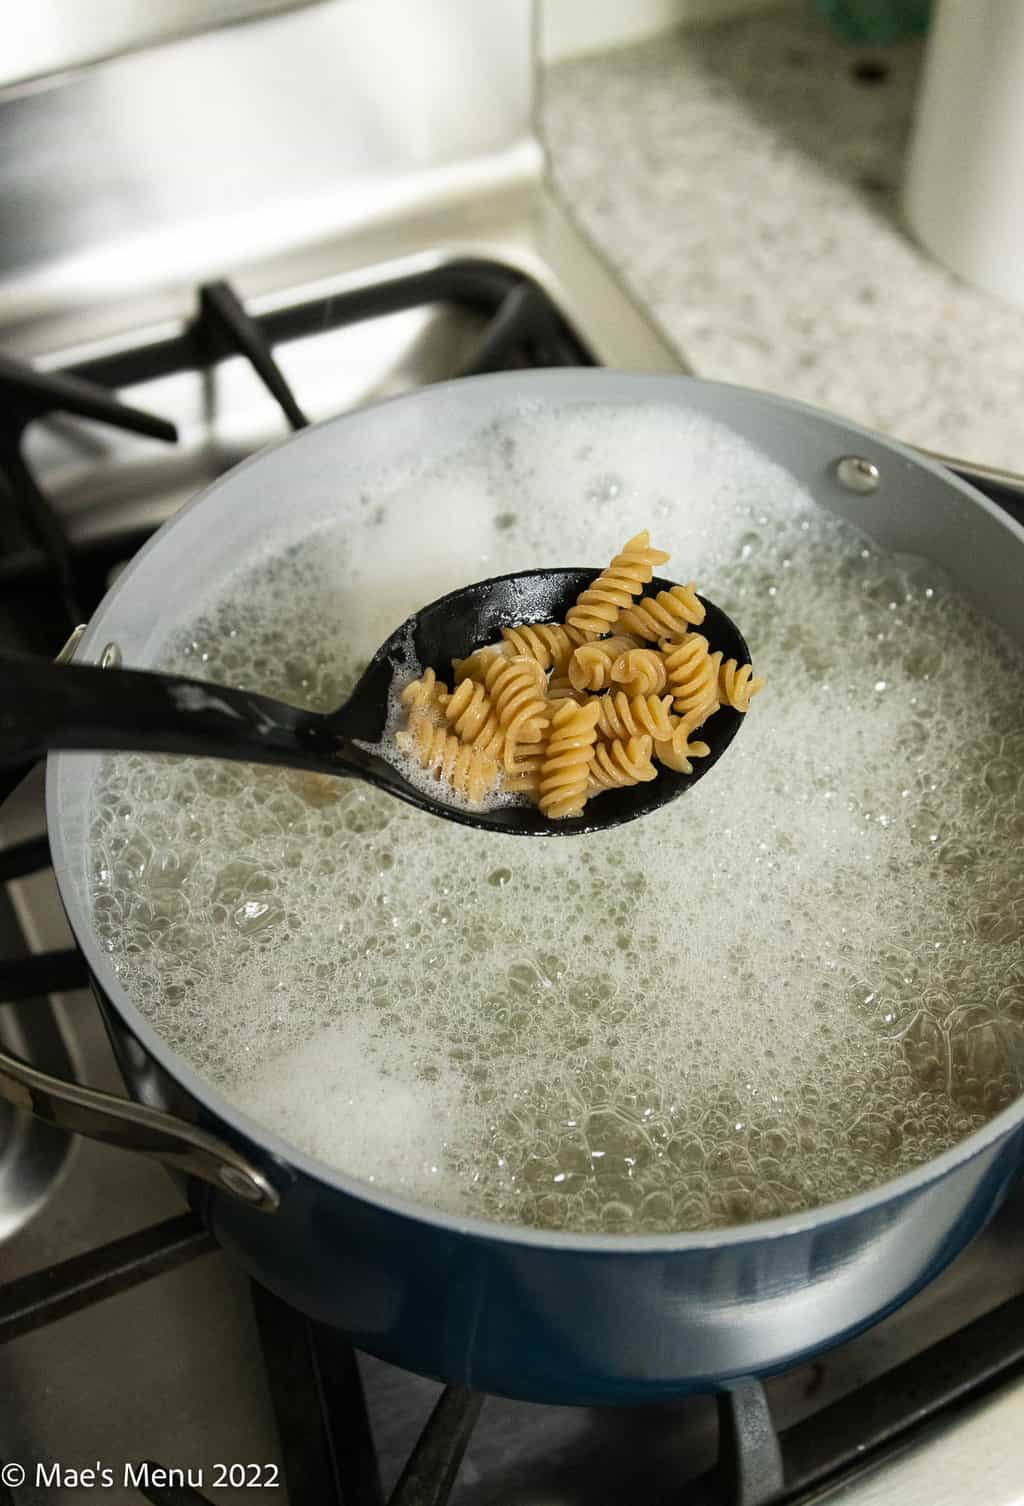 A Dutch oven boiling pasta with a spoon scooping up pasta as it cooks.